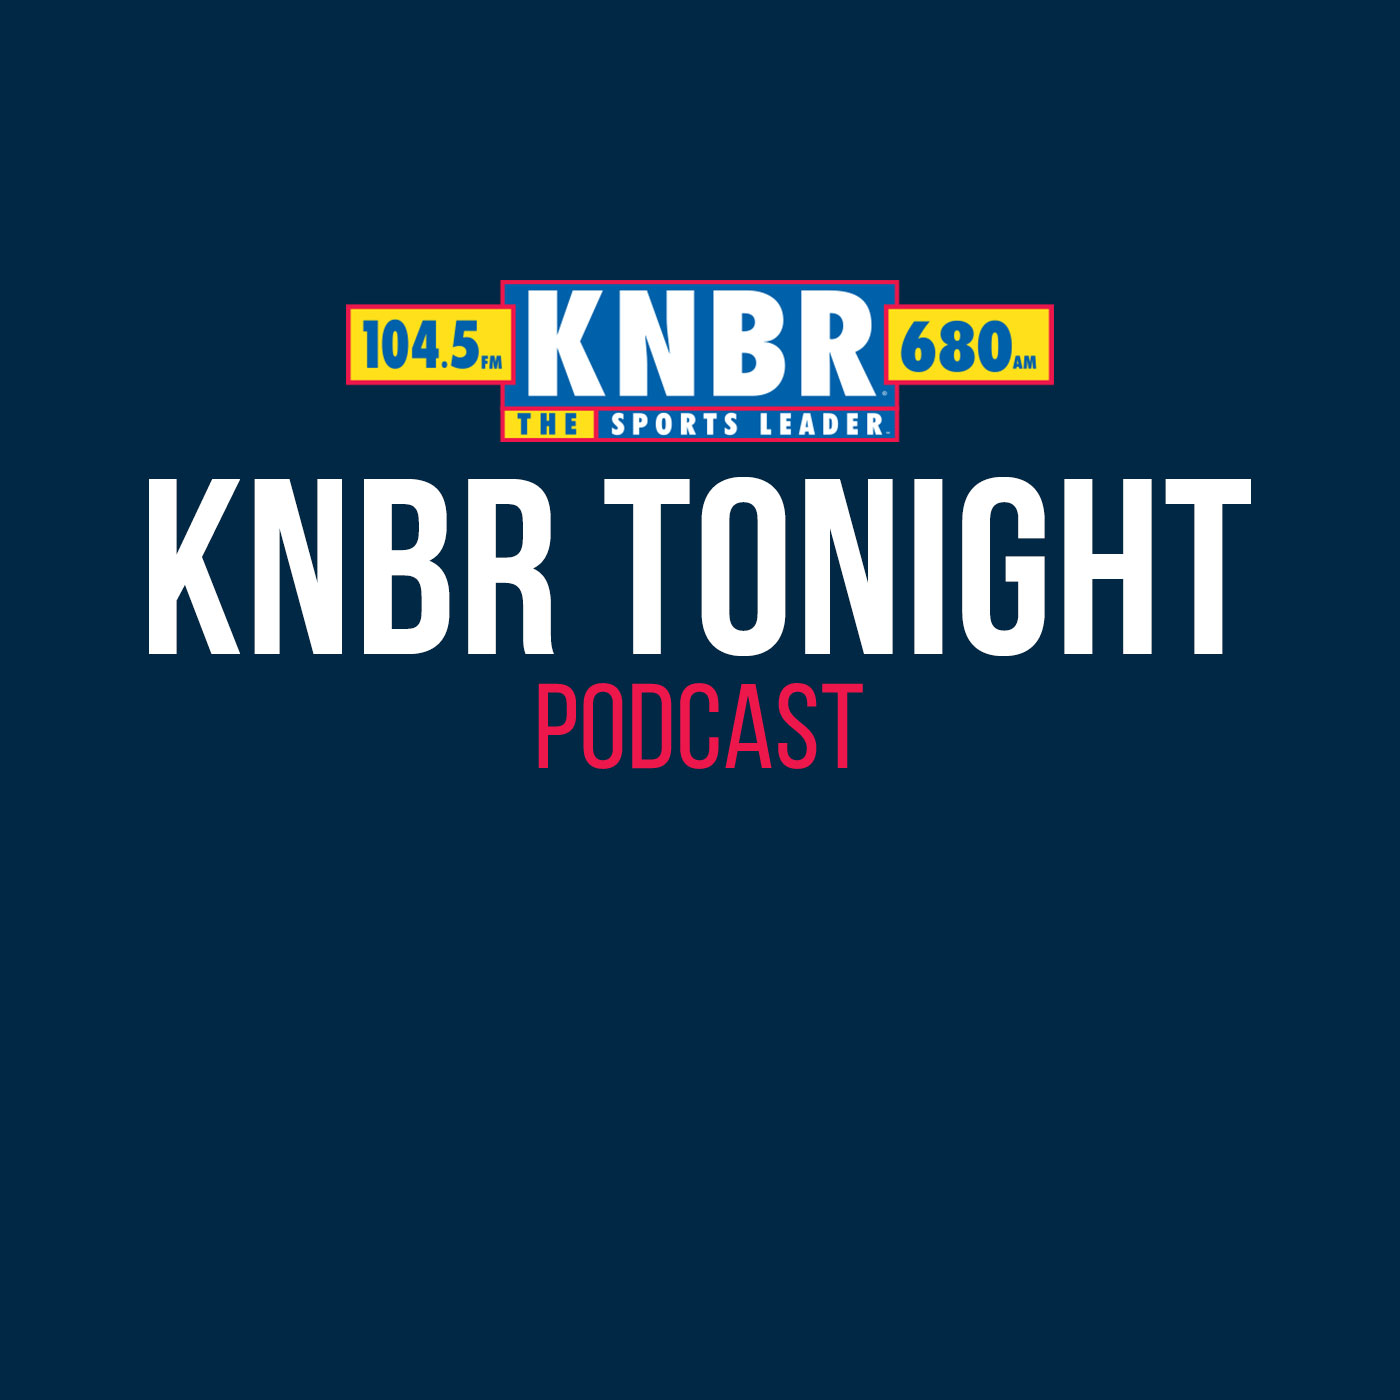 Jordan Elliot joins Kerry Crowley on SportsPhone KNBR to discuss 49ers X Factor, Niners secondary, and upcoming matchup vs. Packers